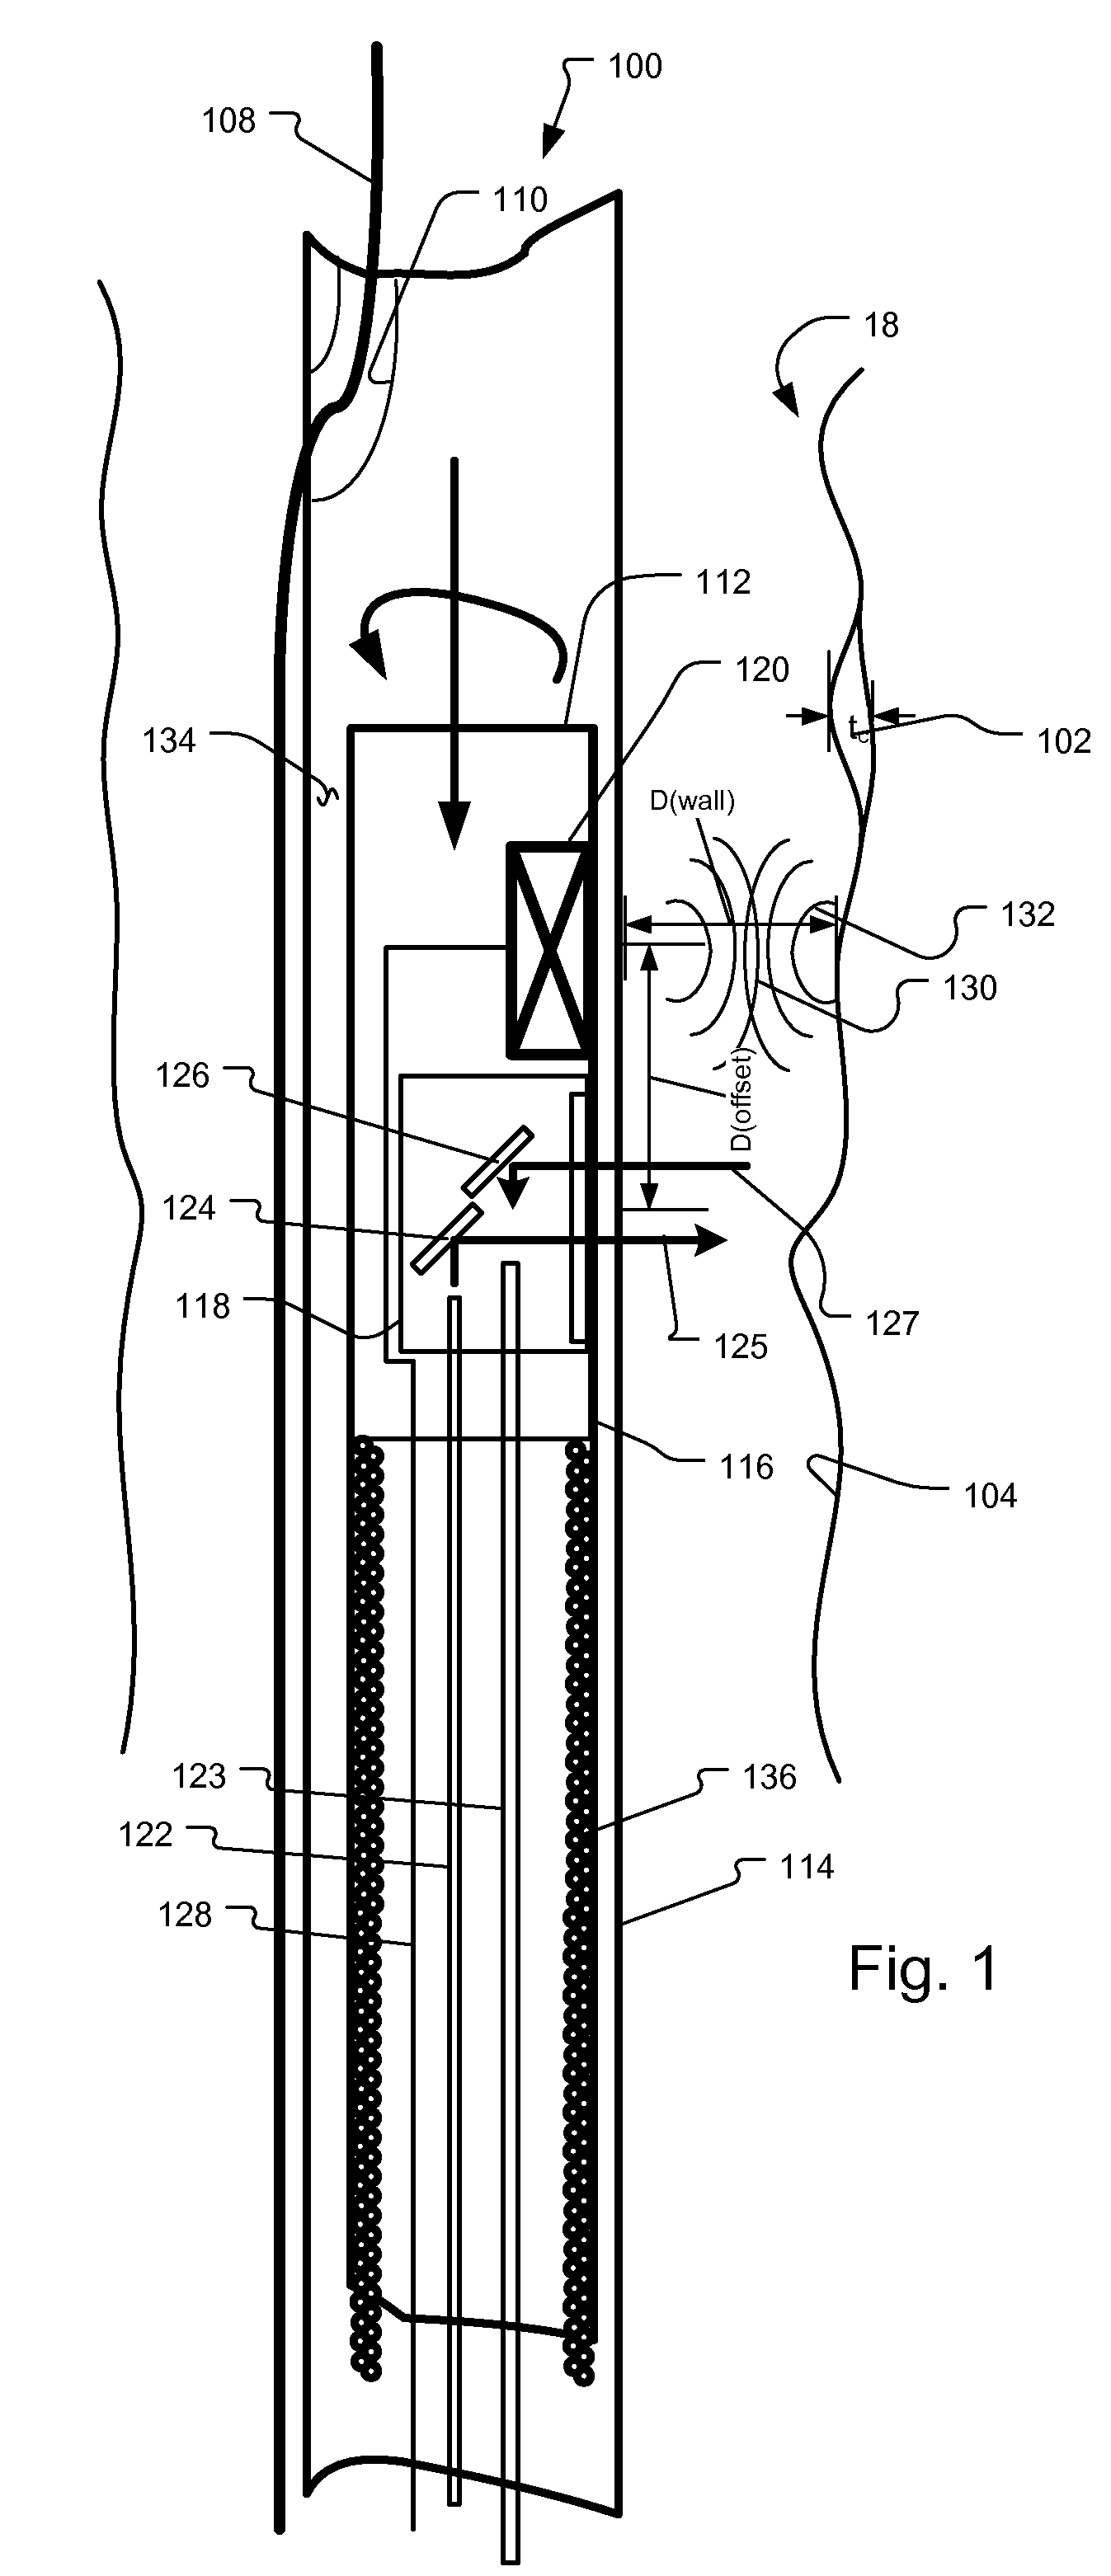 System and Method for Intravascular Structural Analysis Compensation of Chemical Analysis Modality